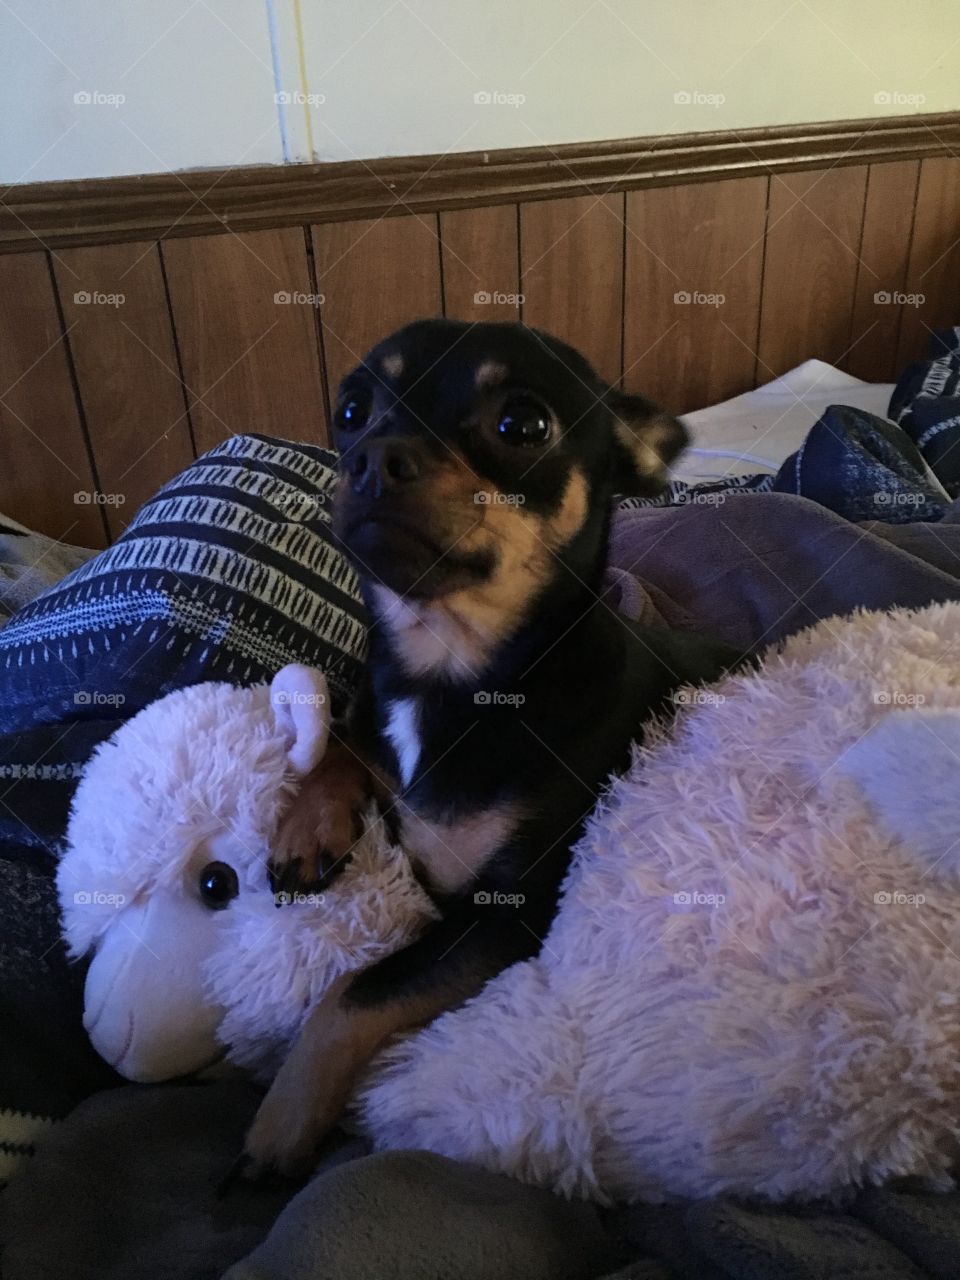 Puppy with stuffed animal.